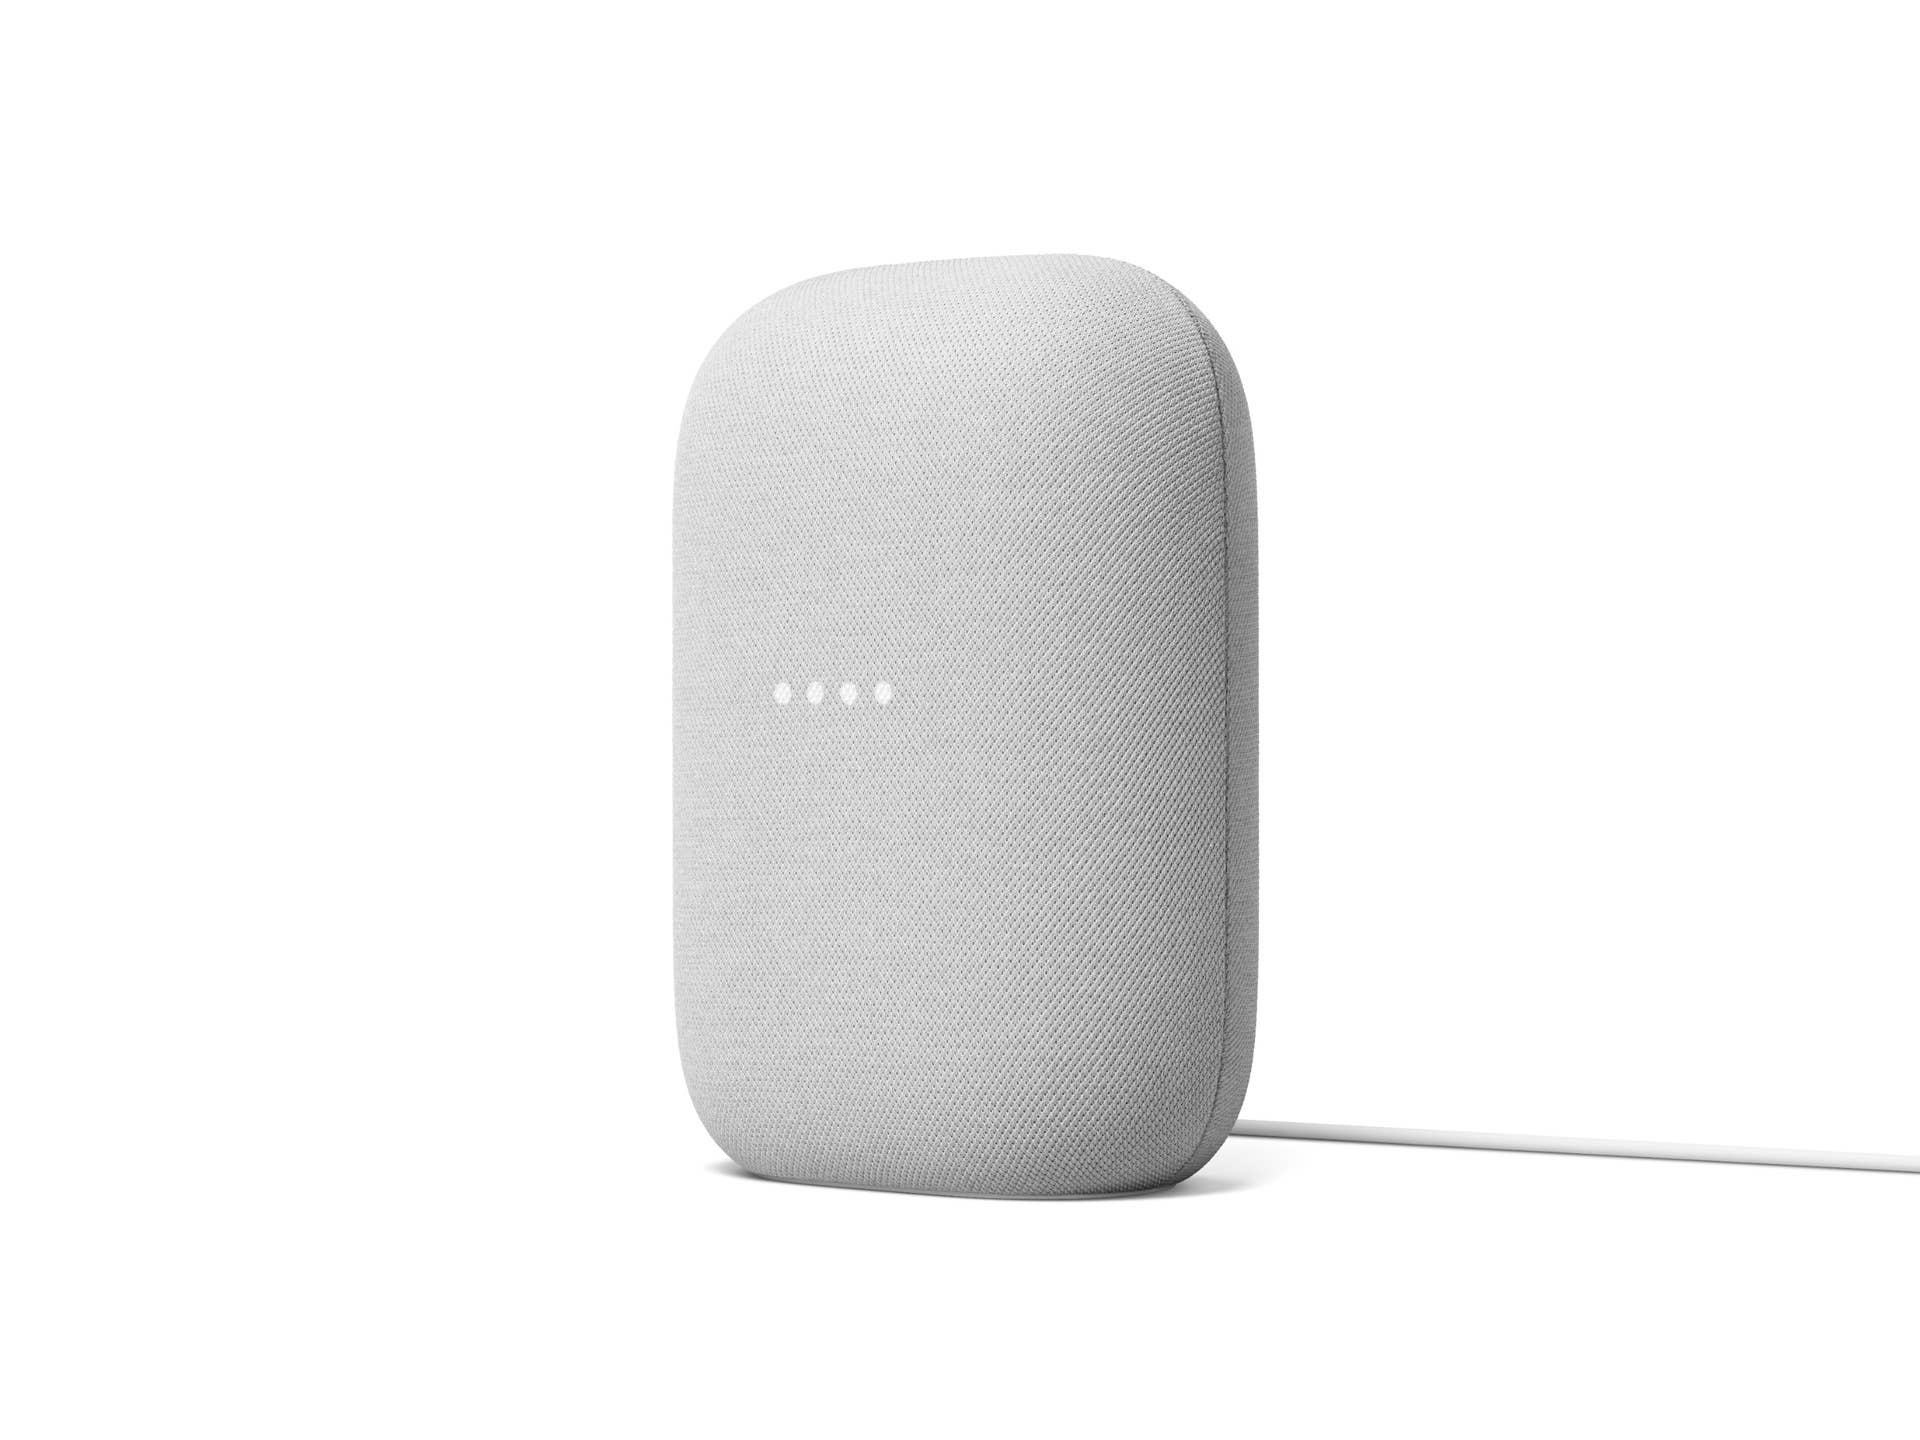 Nest Mini brings twice the bass and an upgraded Assistant